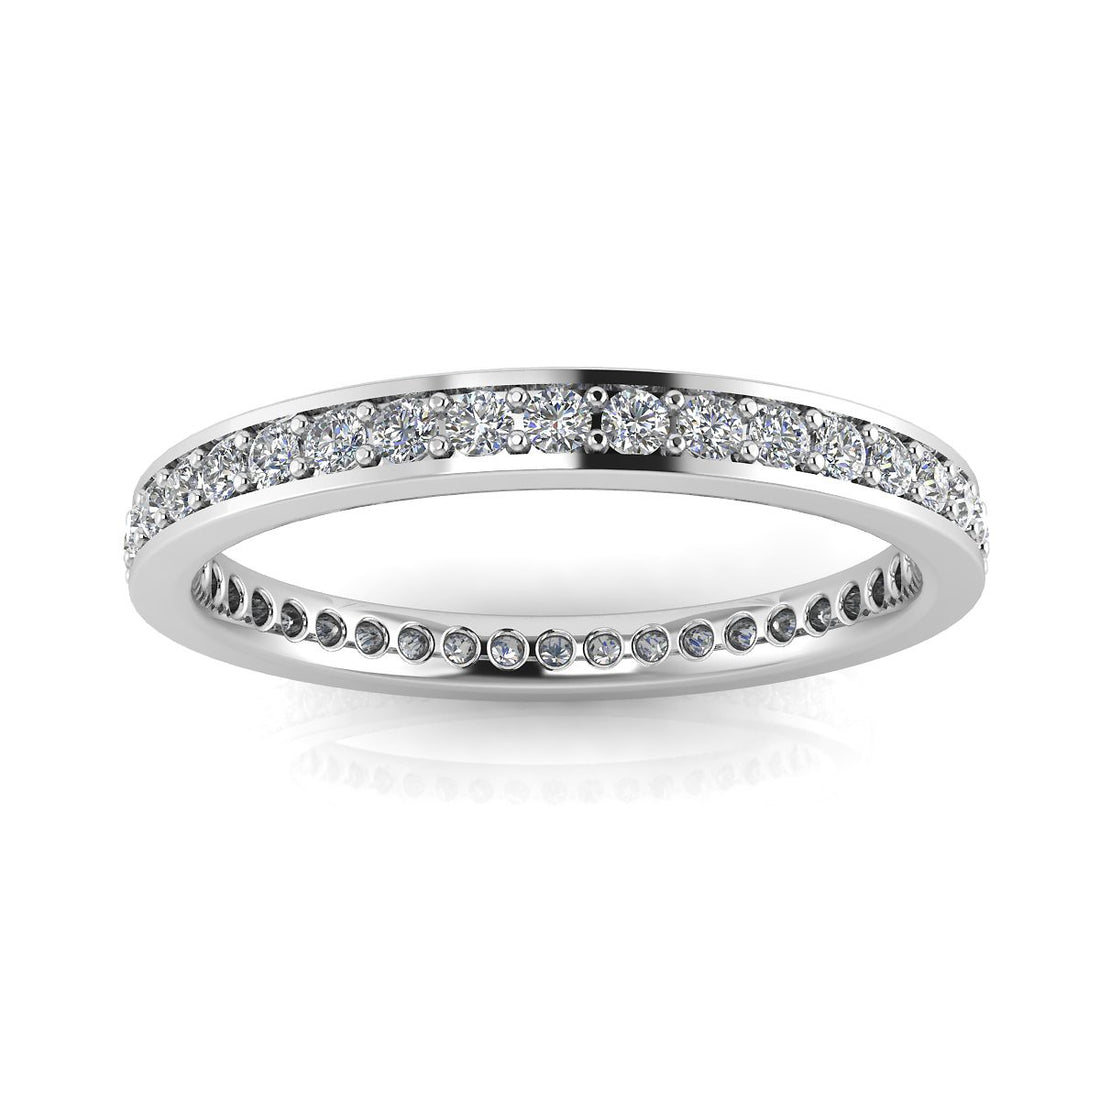 Diamond Ring for Wedding That Every Classy Bride Swears By